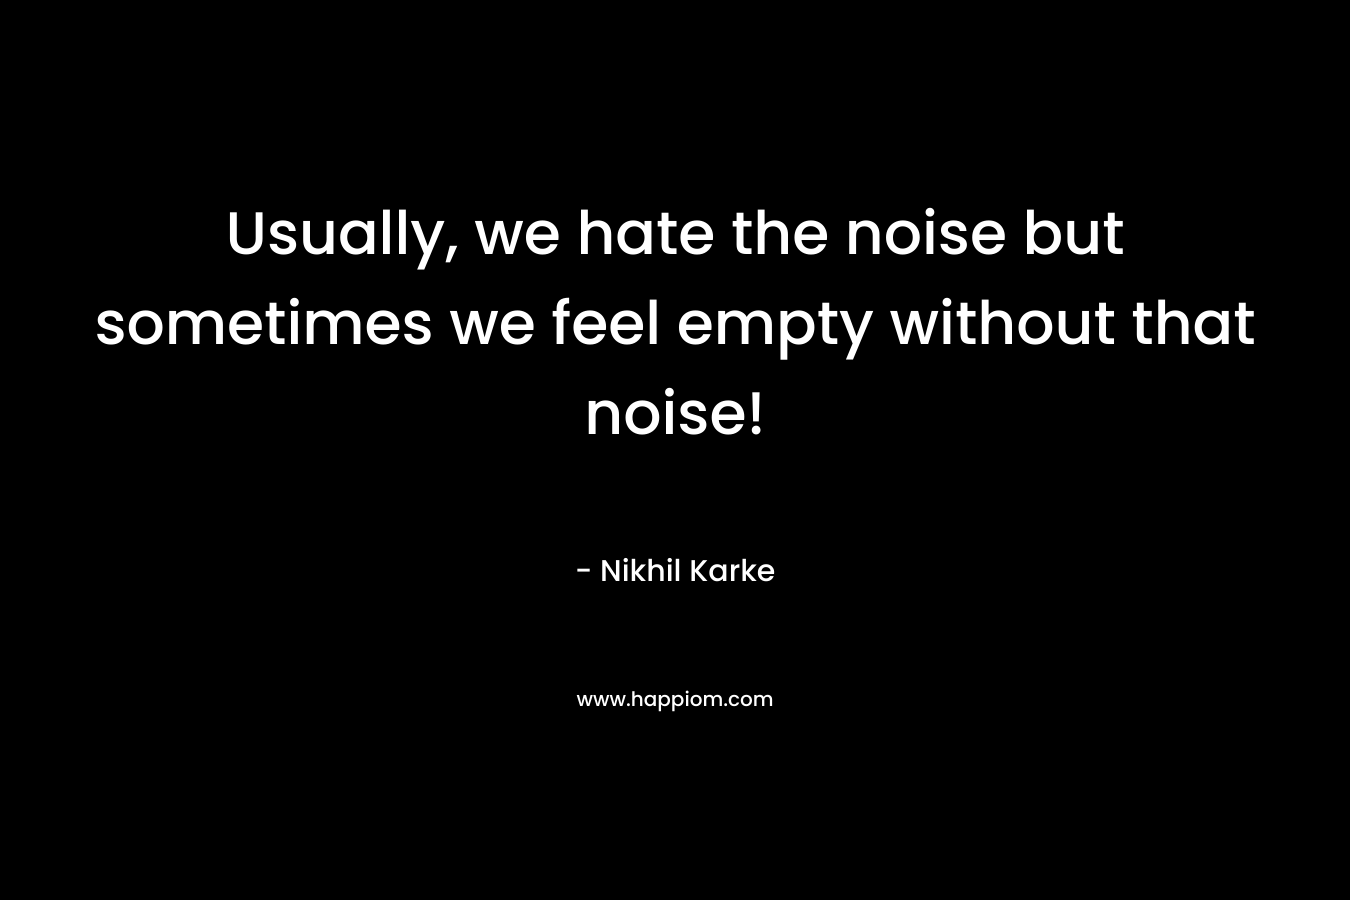 Usually, we hate the noise but sometimes we feel empty without that noise!